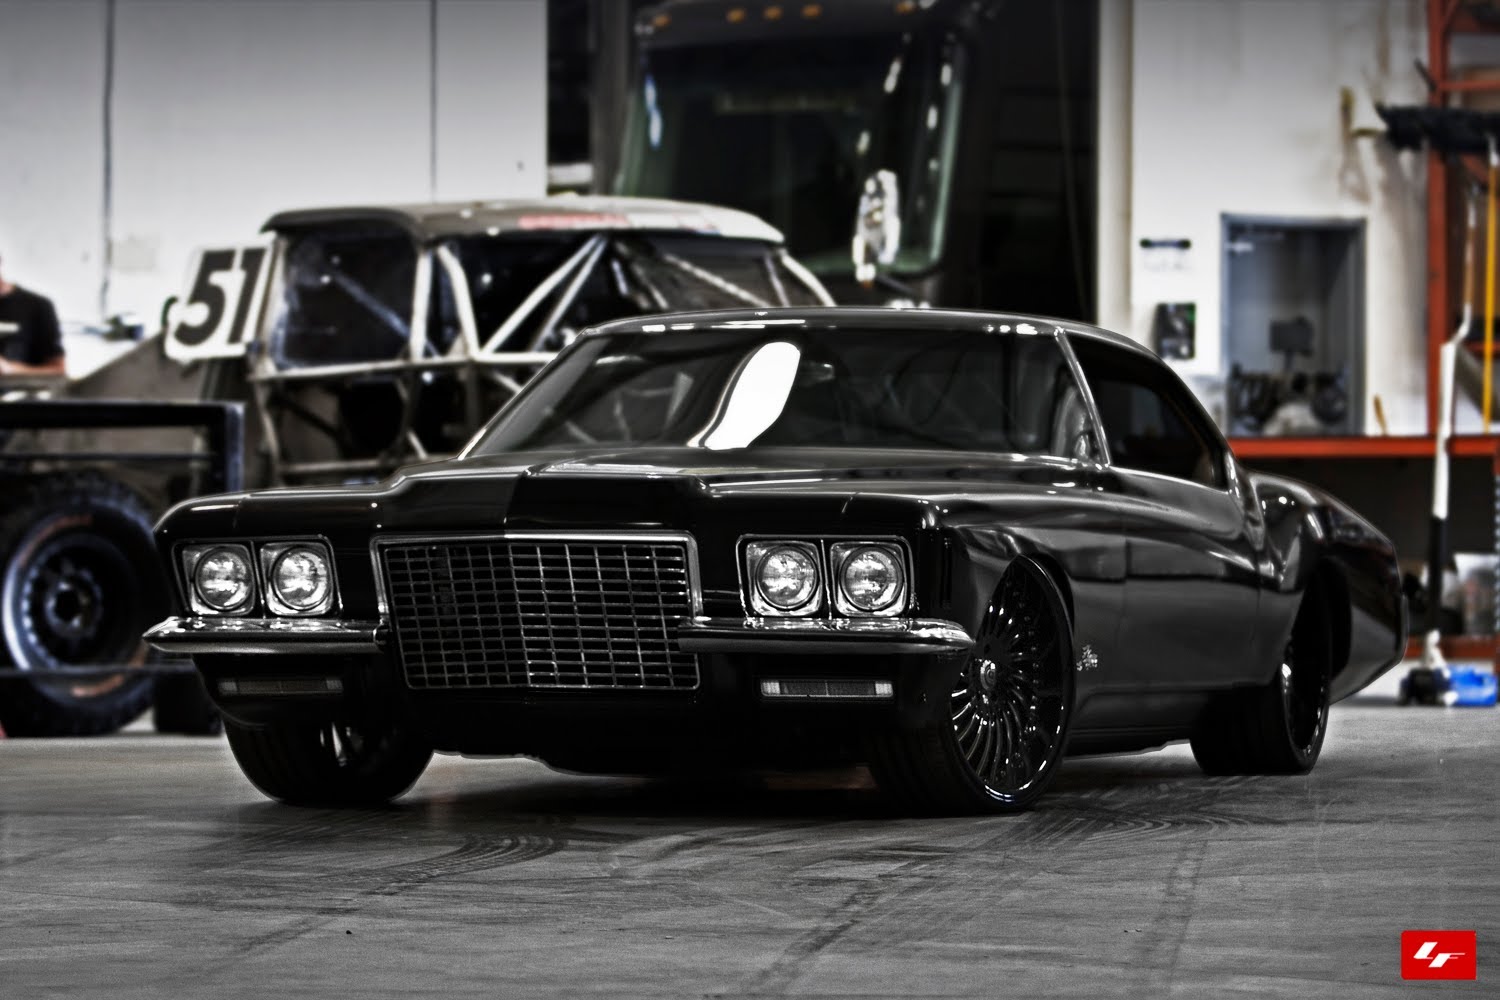 HQ Buick Riviera Wallpapers | File 193.4Kb